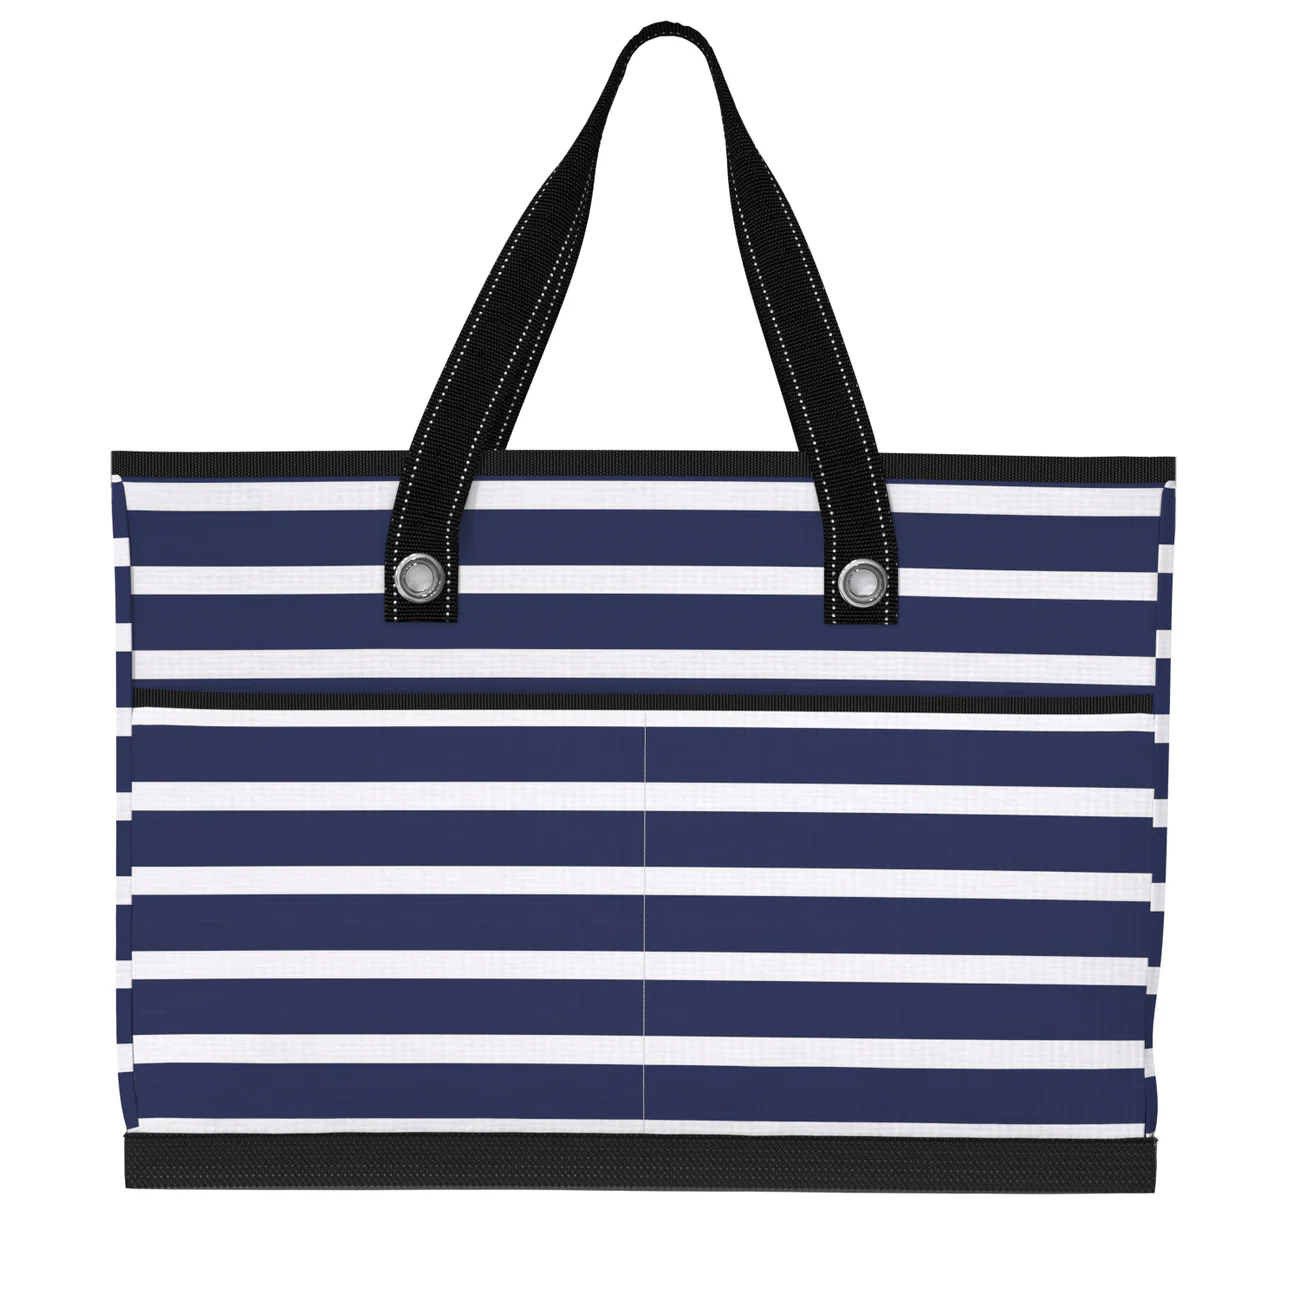 The BJ Bag Pocket Tote - Catch of the Day